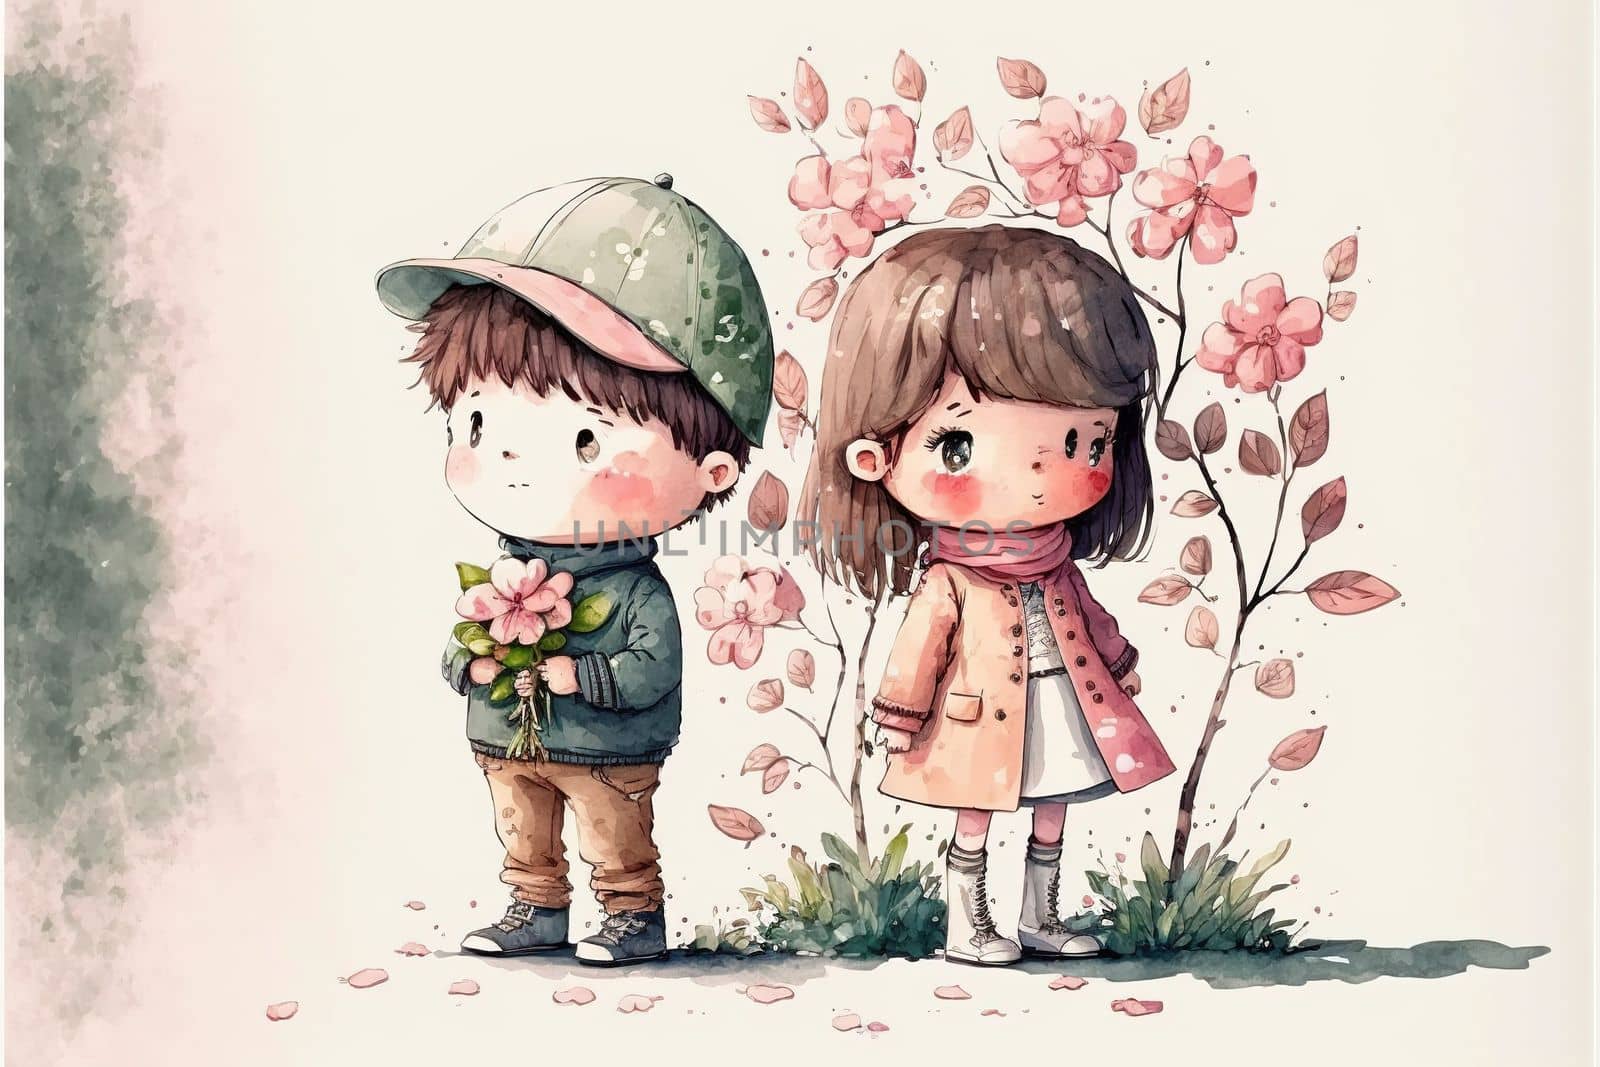 Cute boy and girl in love on romantic Valentine's day hand drawn cartoon style by biancoblue